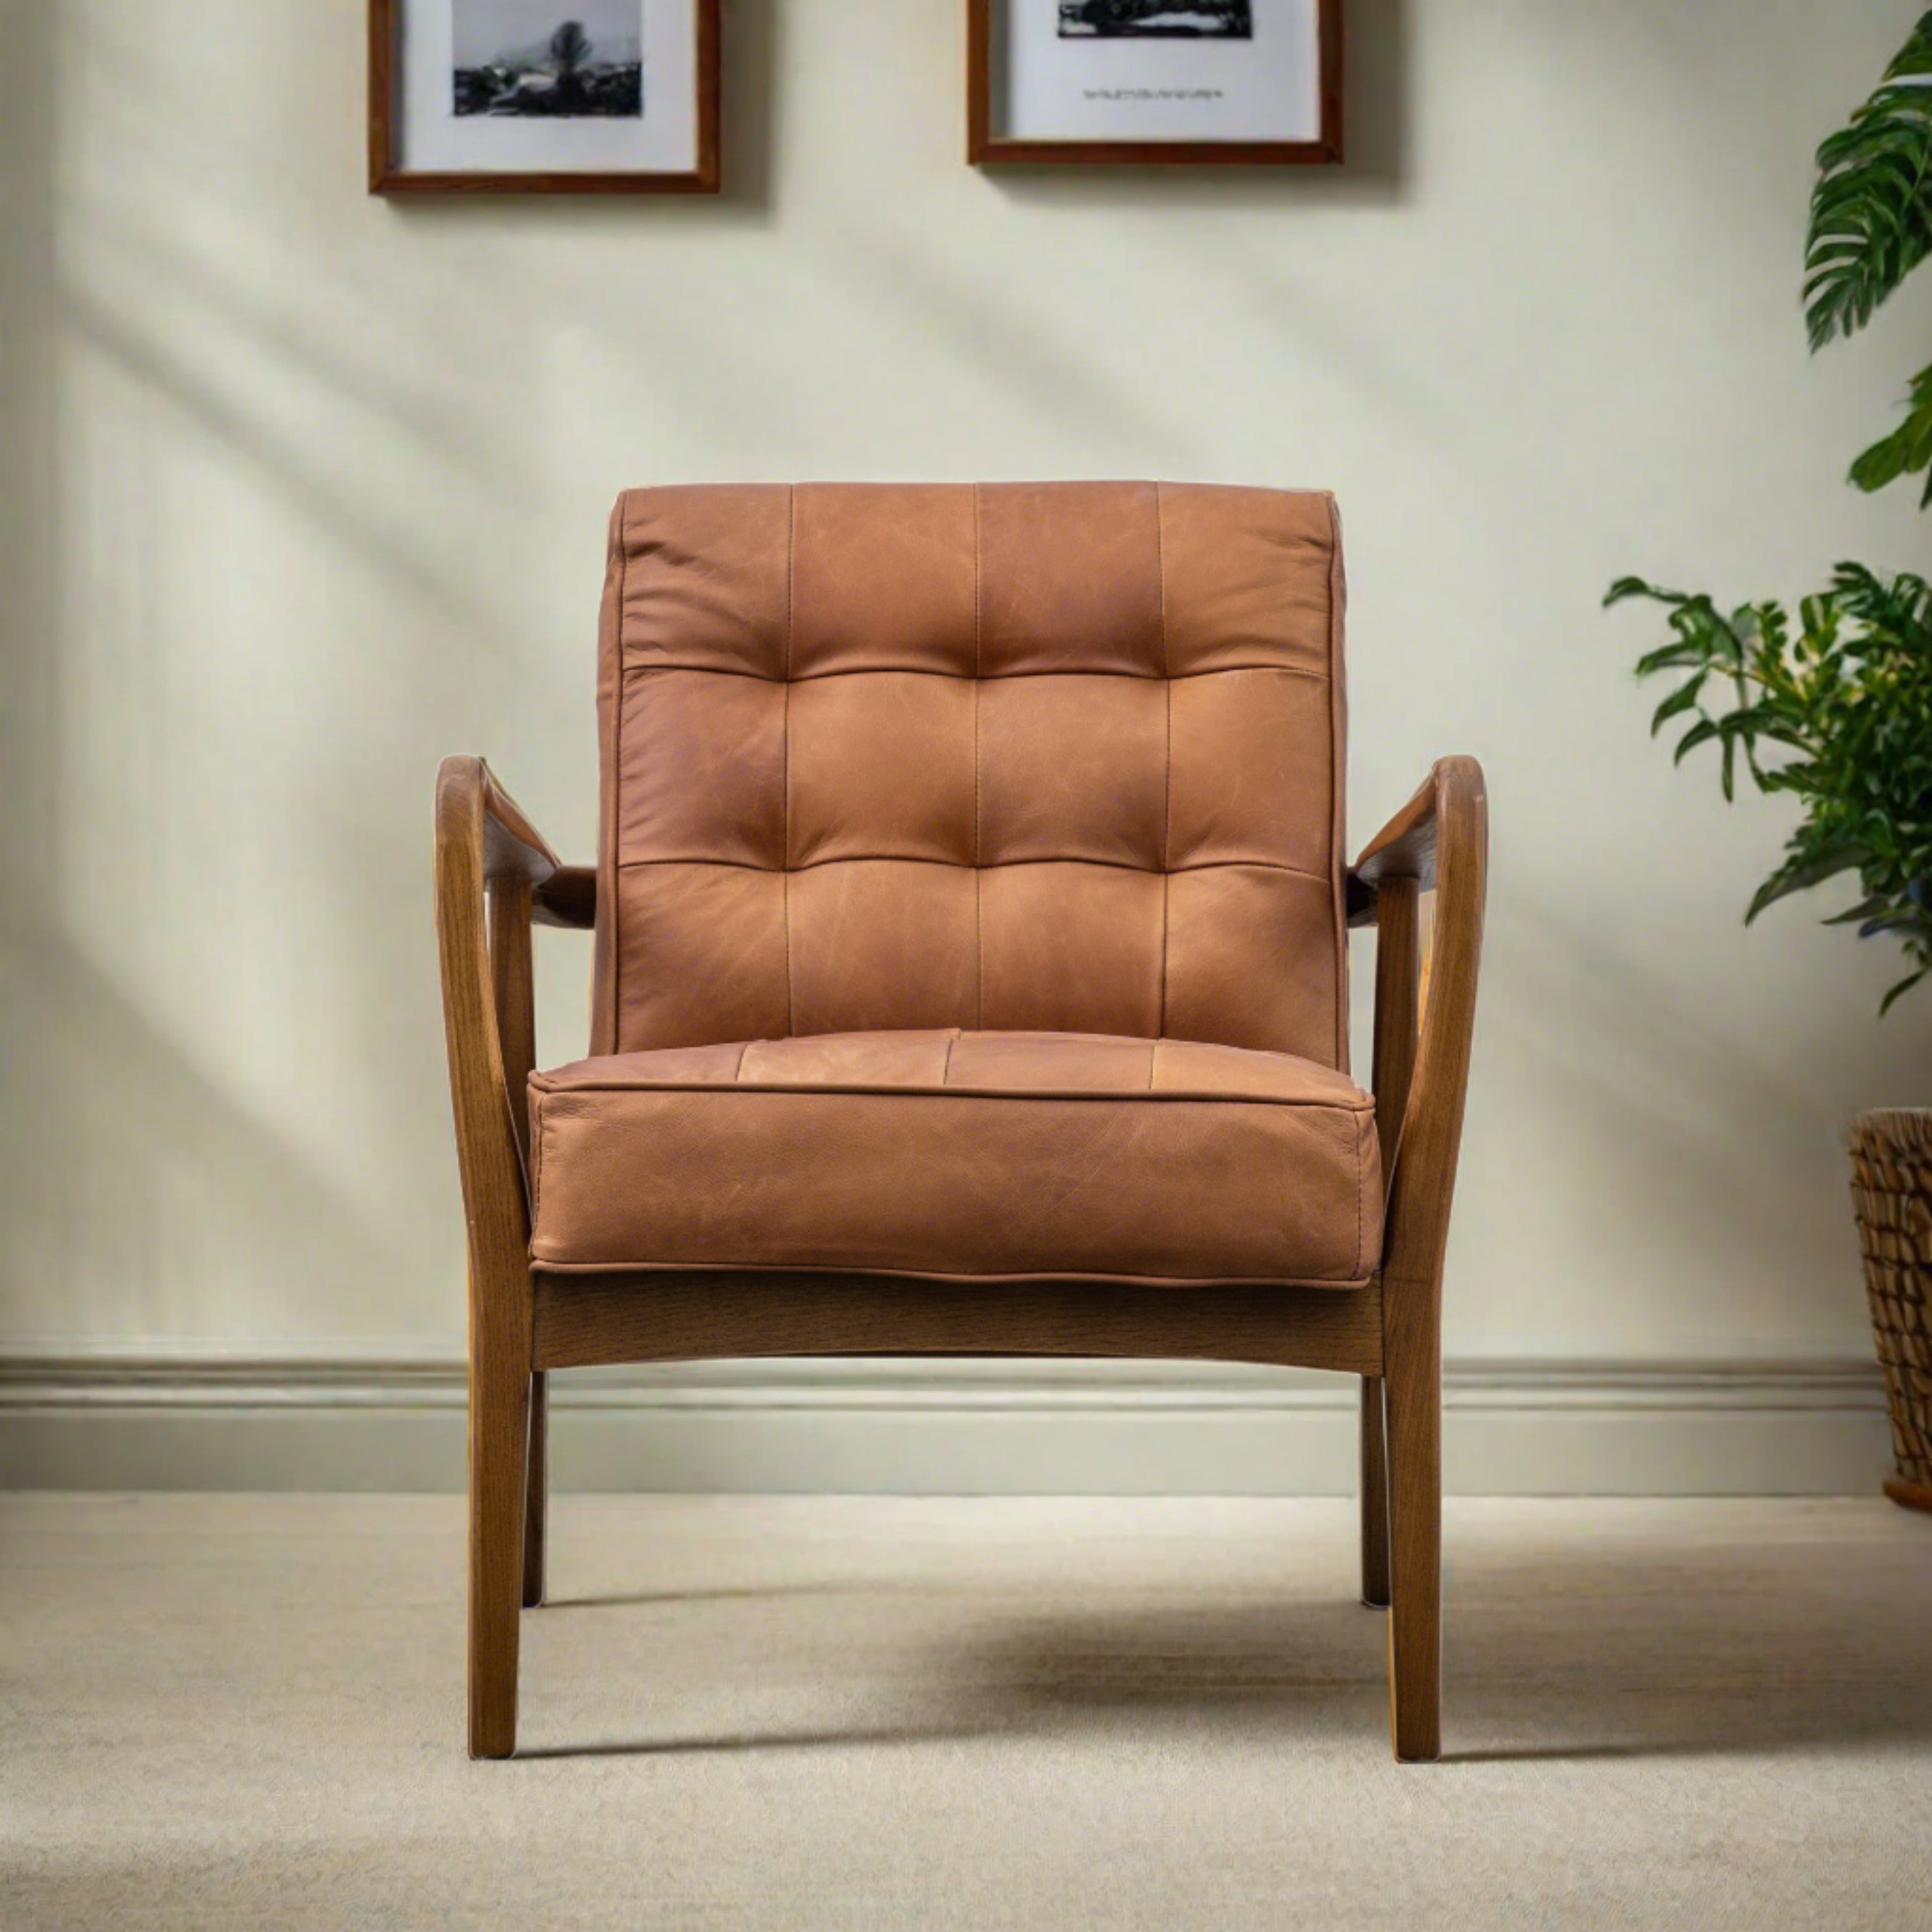 Ronson Mid Century Armchair with solid oak frame and top grain vintage brown leather upholstery | MalletandPlane.com